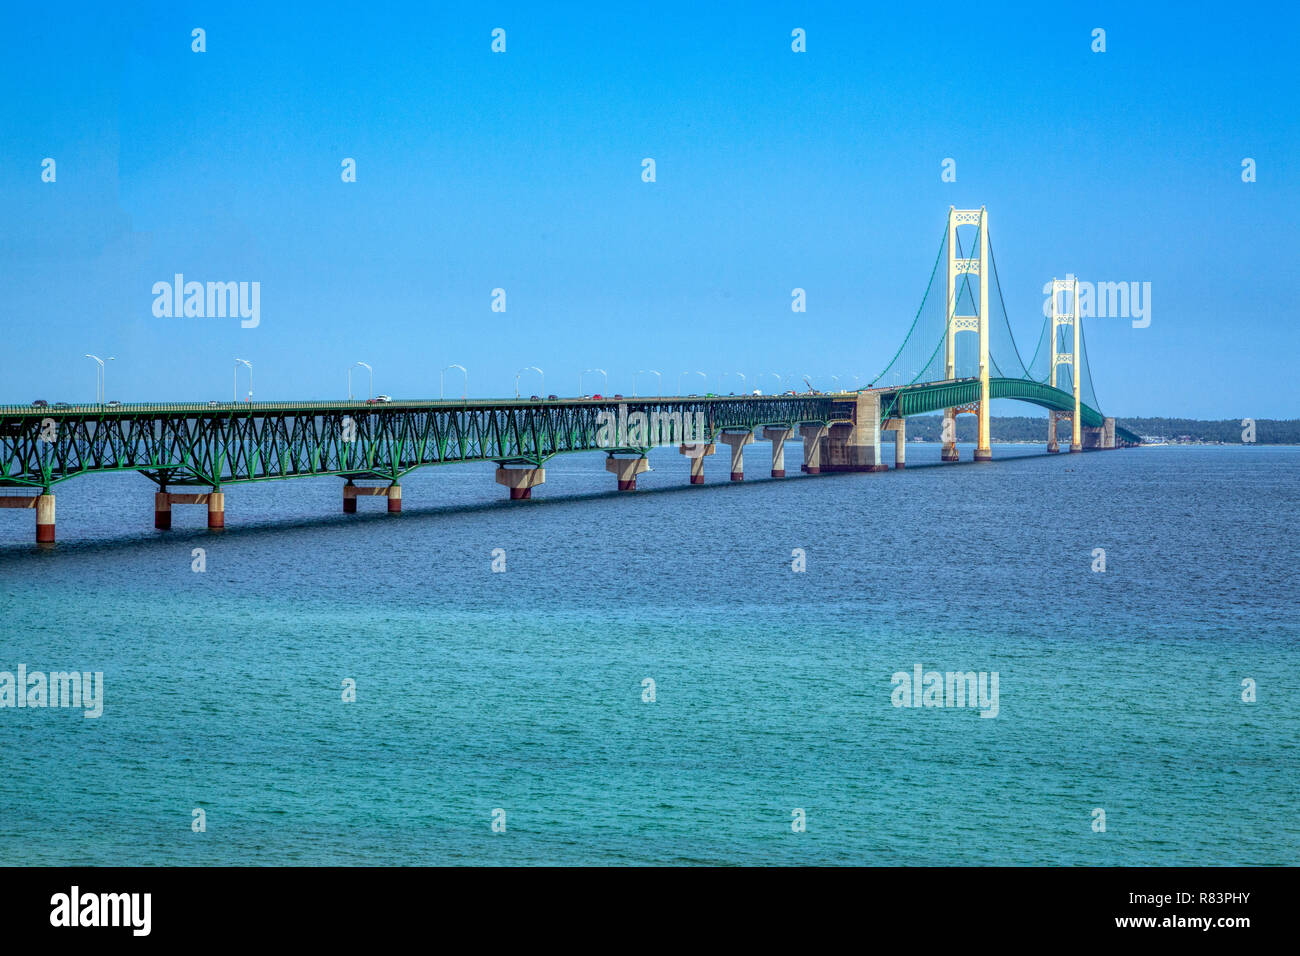 The Mackinac Bridge, opened in 1957, spans the Straits of Mackinac to connect Michigan's upper and lower peninsulas. Stock Photo